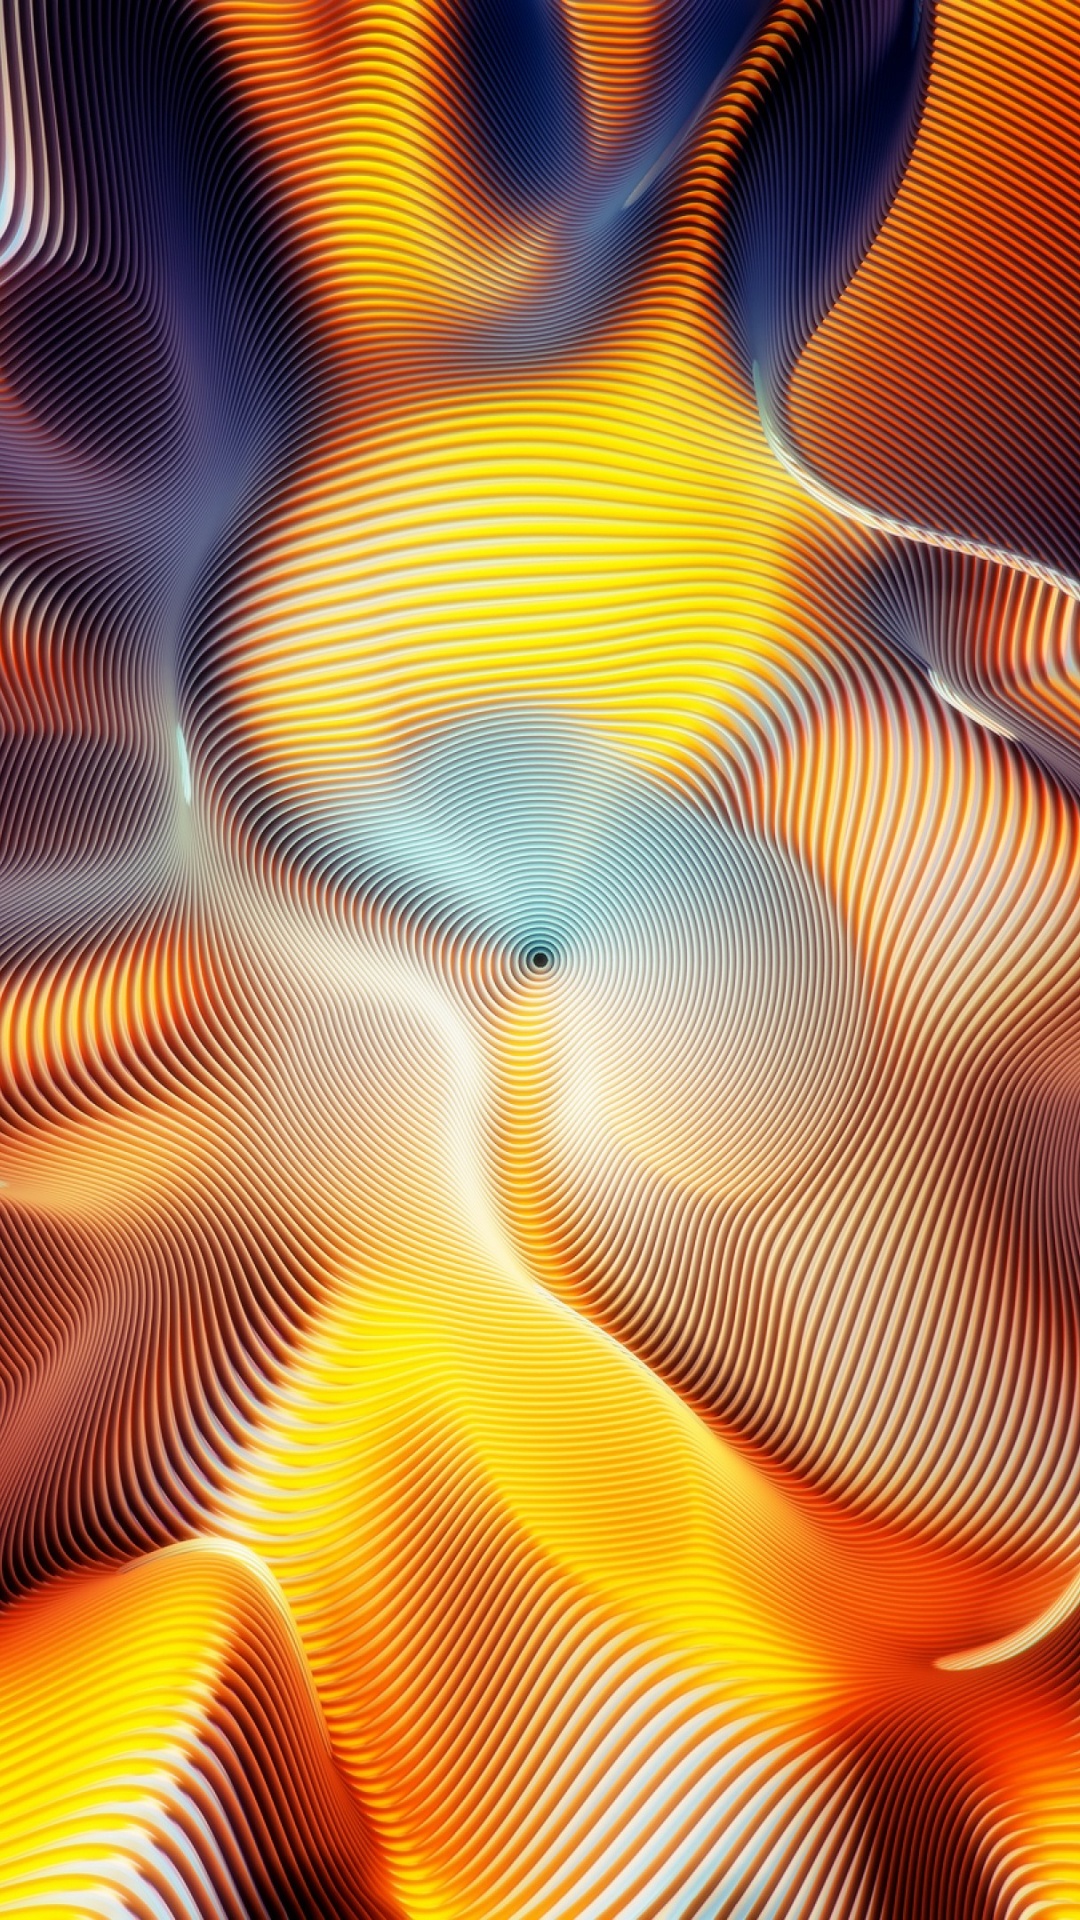 Blue and Orange Abstract Painting. Wallpaper in 1080x1920 Resolution